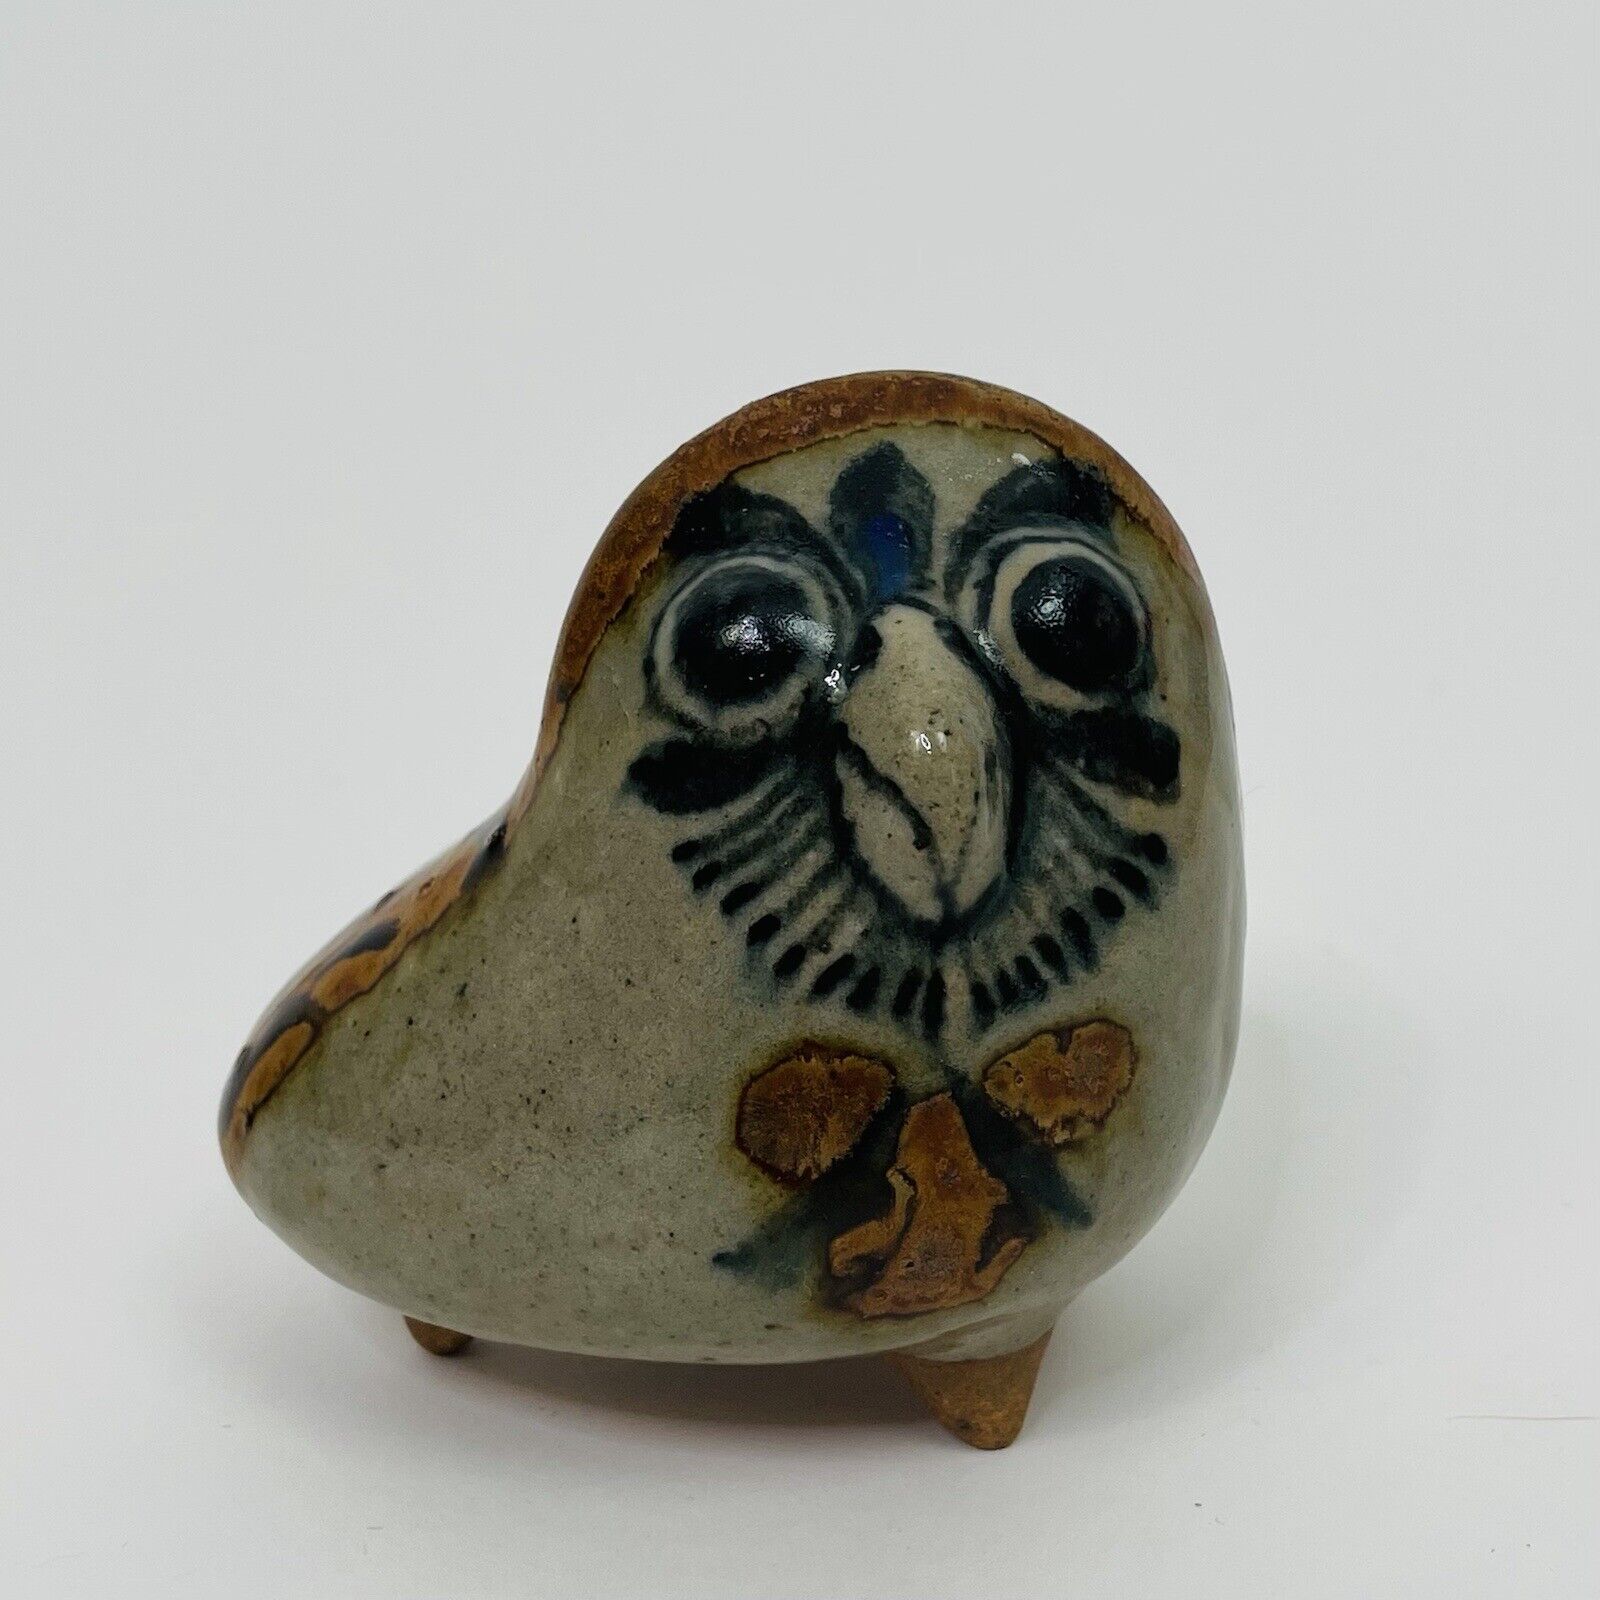 Vintage Owl Footed Ceramic Pottery Hand Painted Crafted Boho Folk Art Small